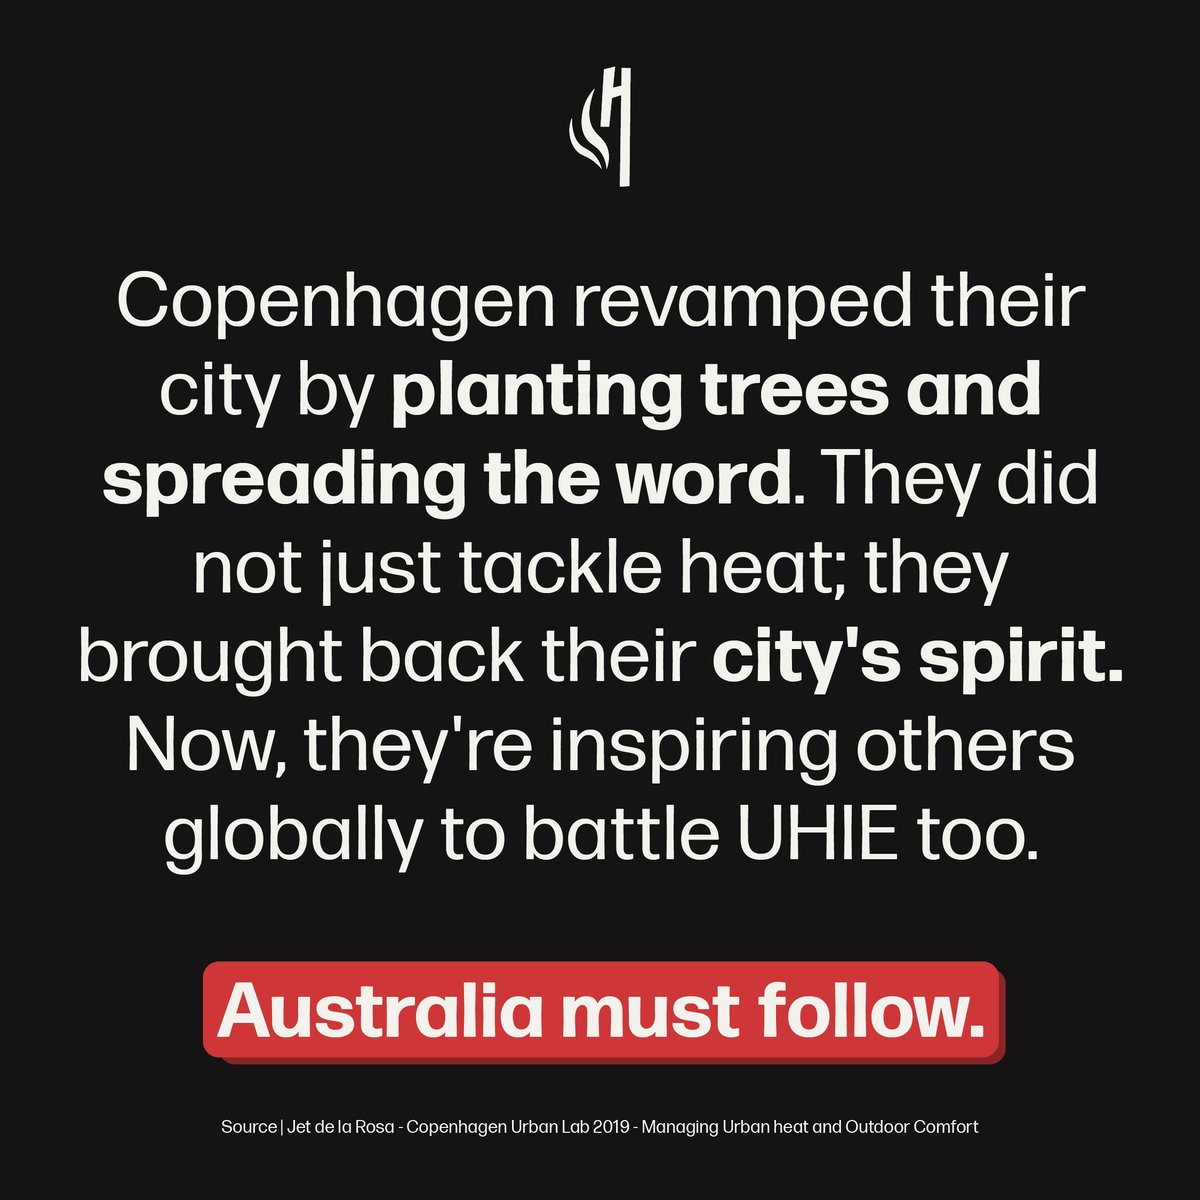 Let's take a leaf out of Copenhagen's book! 🌳

By planting trees and raising awareness, they fought urban heat and revived their city's spirit. Australia, it's time to follow suit and cool down our urban spaces! #UrbanHeat 

#TreePlanting #CoolCities #Copenhagen